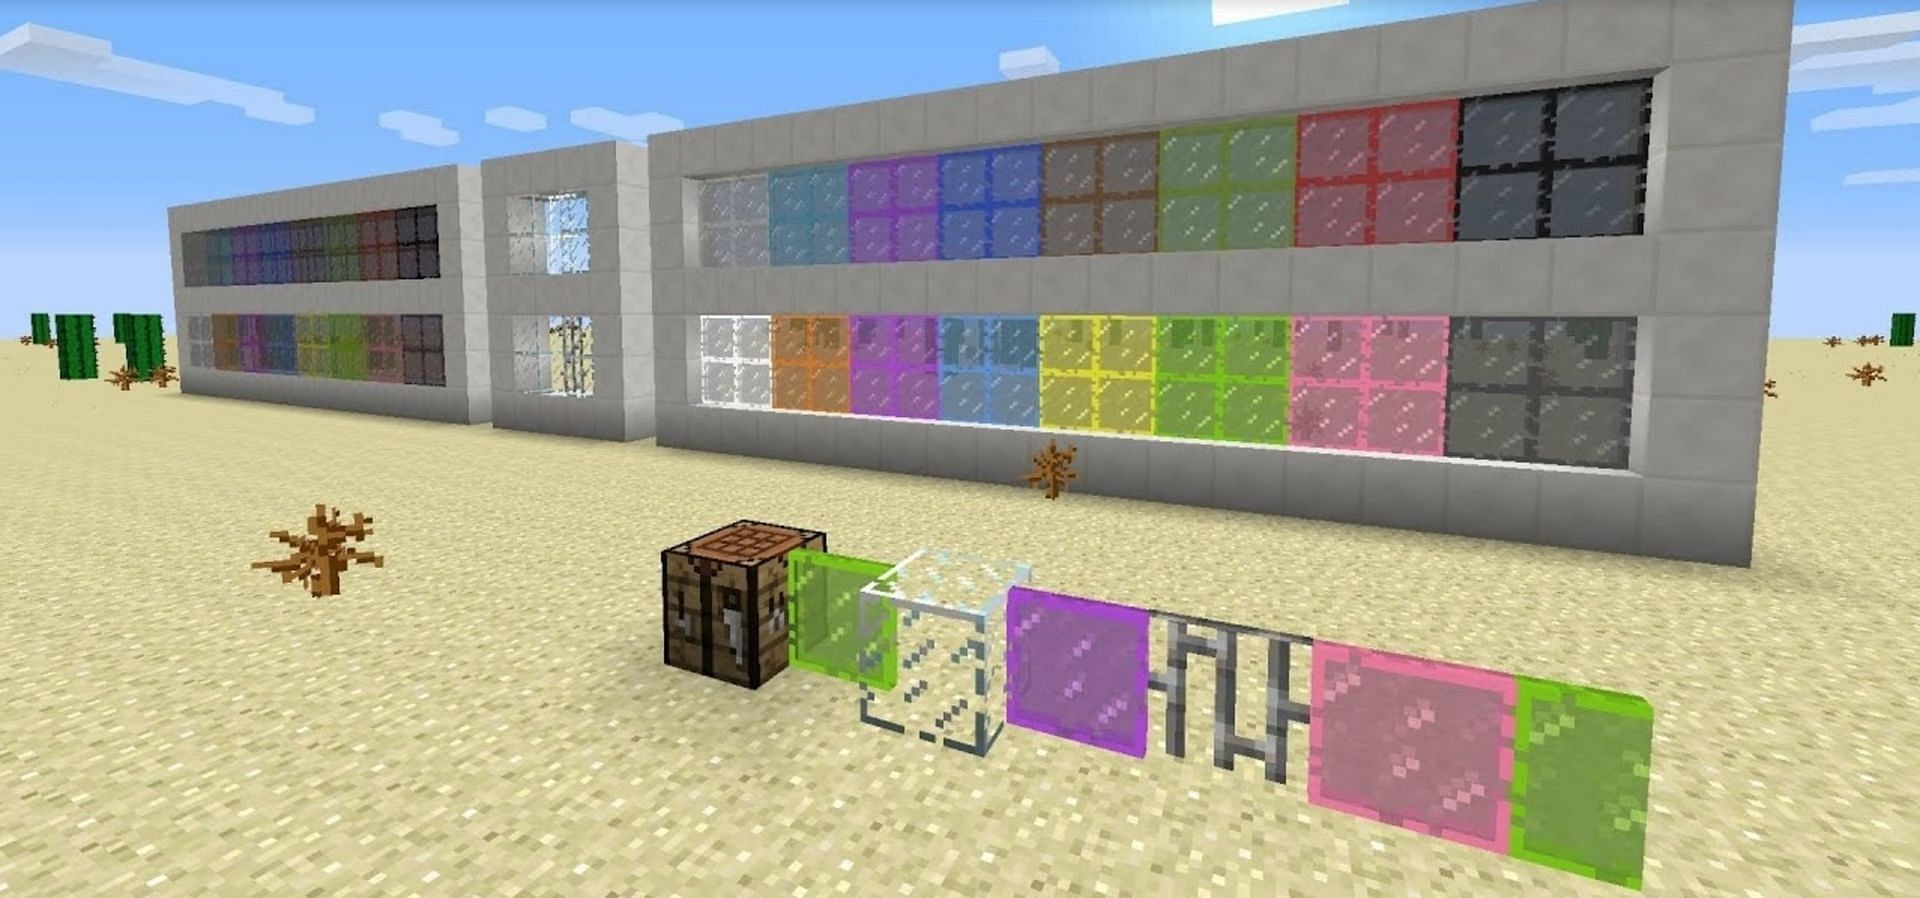 Stained glass window panes in a nearby window (Image via Youtube user Stormfrenzy)